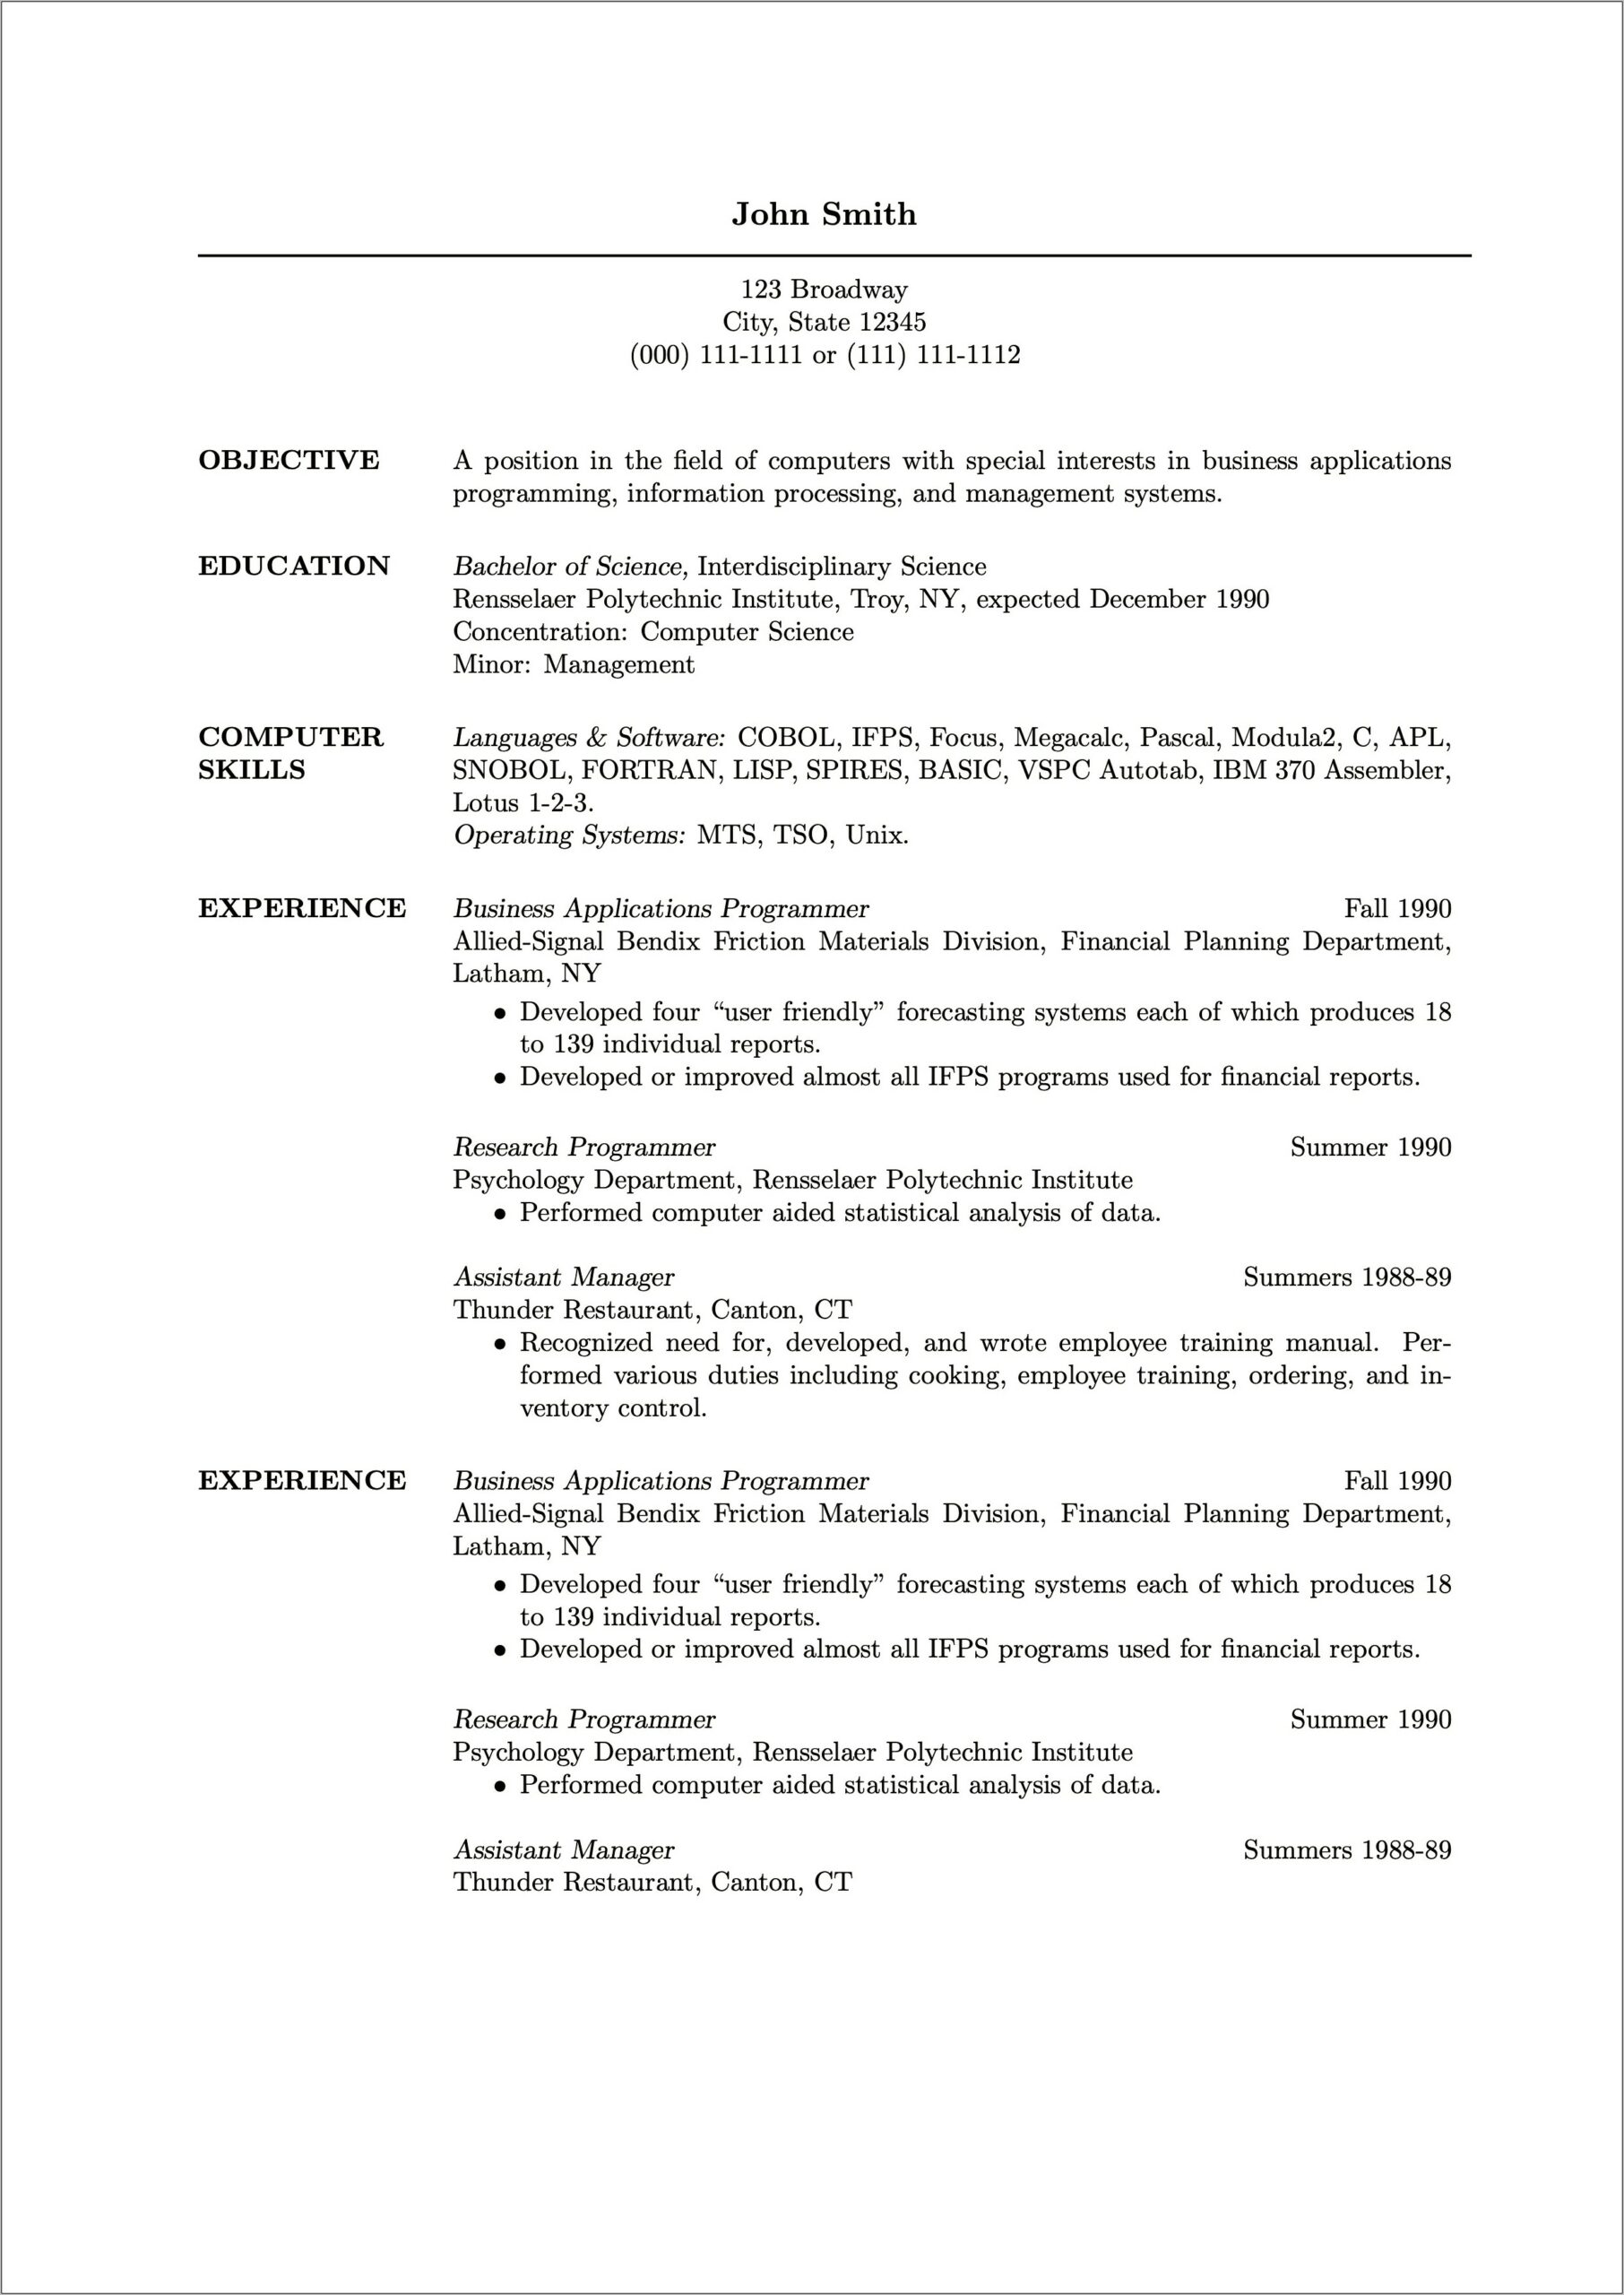 Trainer In Restraunt Example Resume